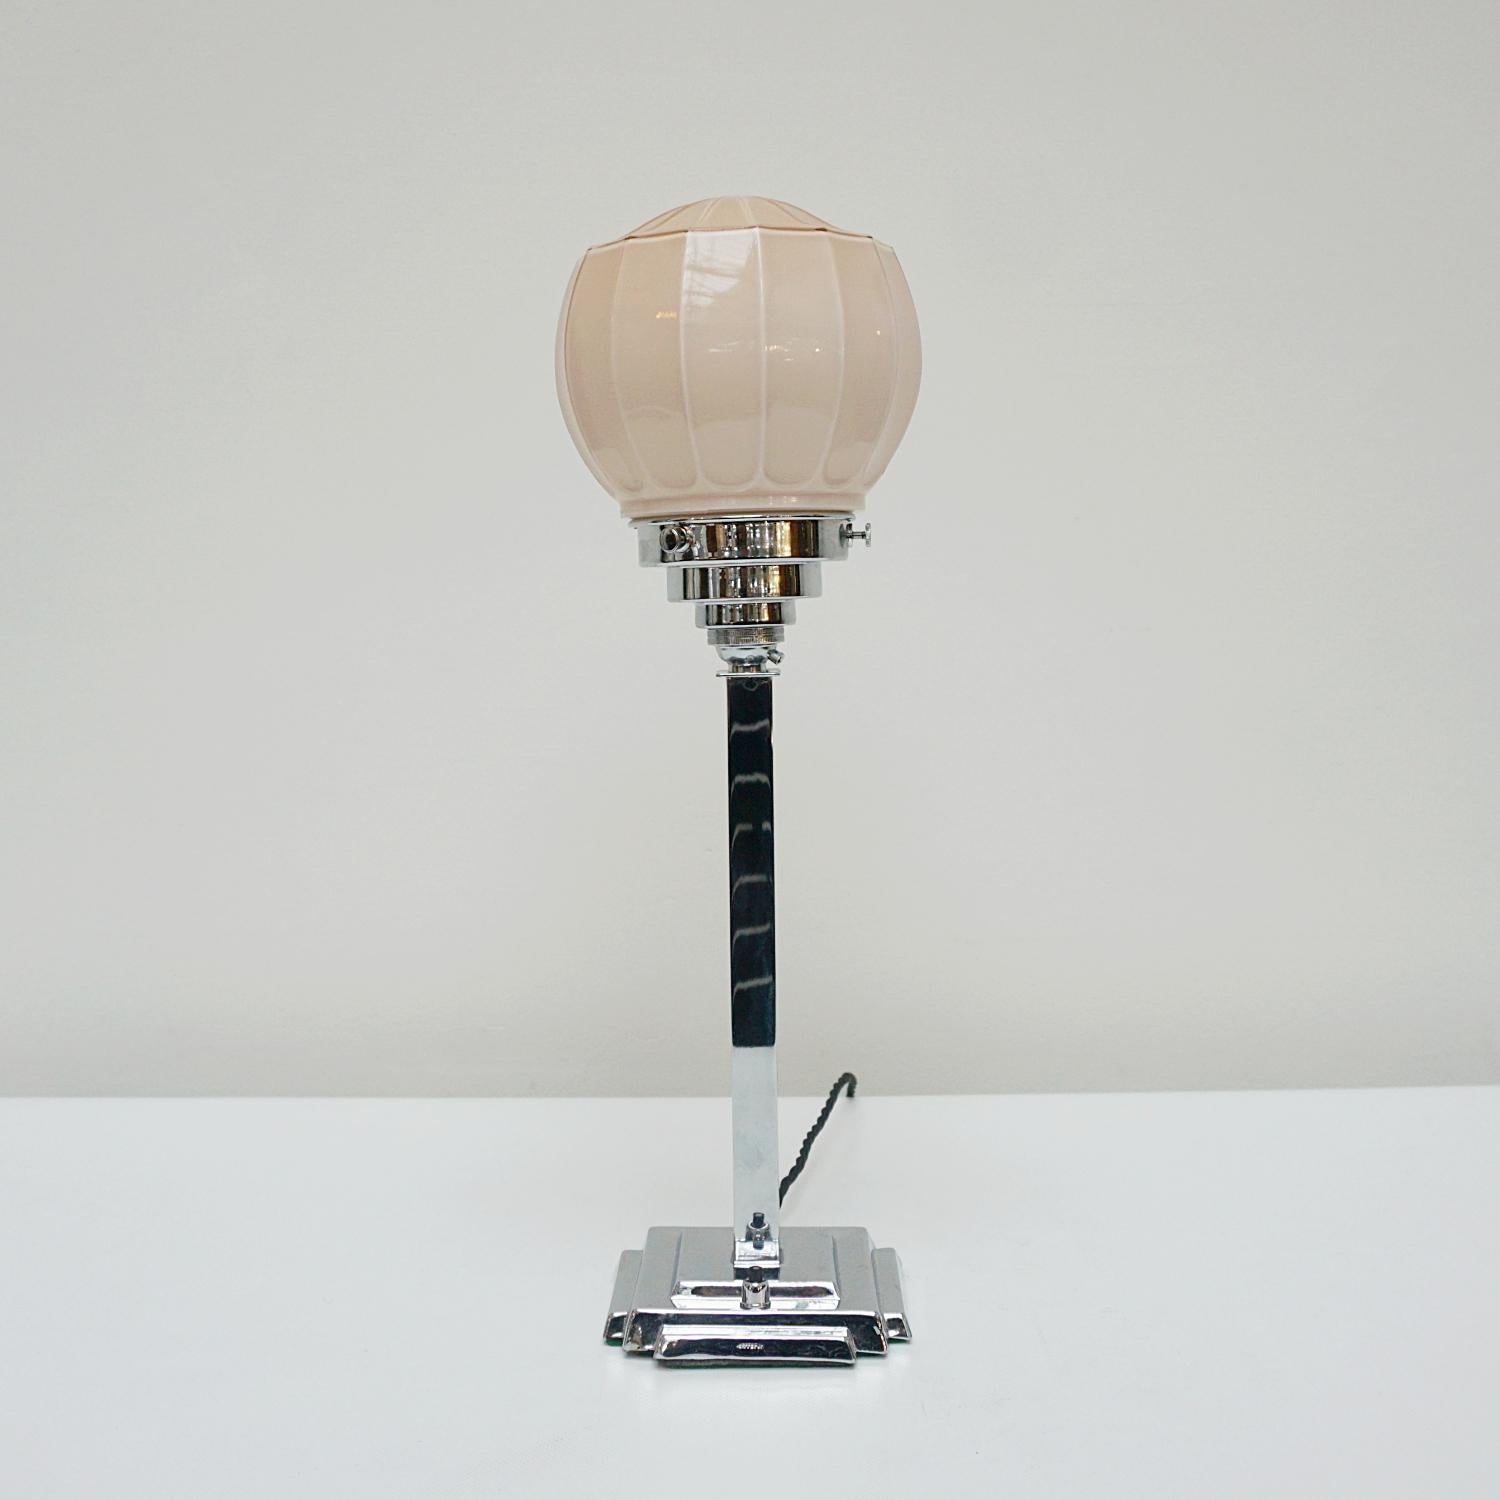 An original Art Deco table lamp. Chromed stem with ornate peach pink glass globe shade.

Dimensions: H 46cm W 12cm 

Origin: English

Item Number: J313

All of our lighting is fully refurbished, re-wired, and re-chromed with some replacement parts. 